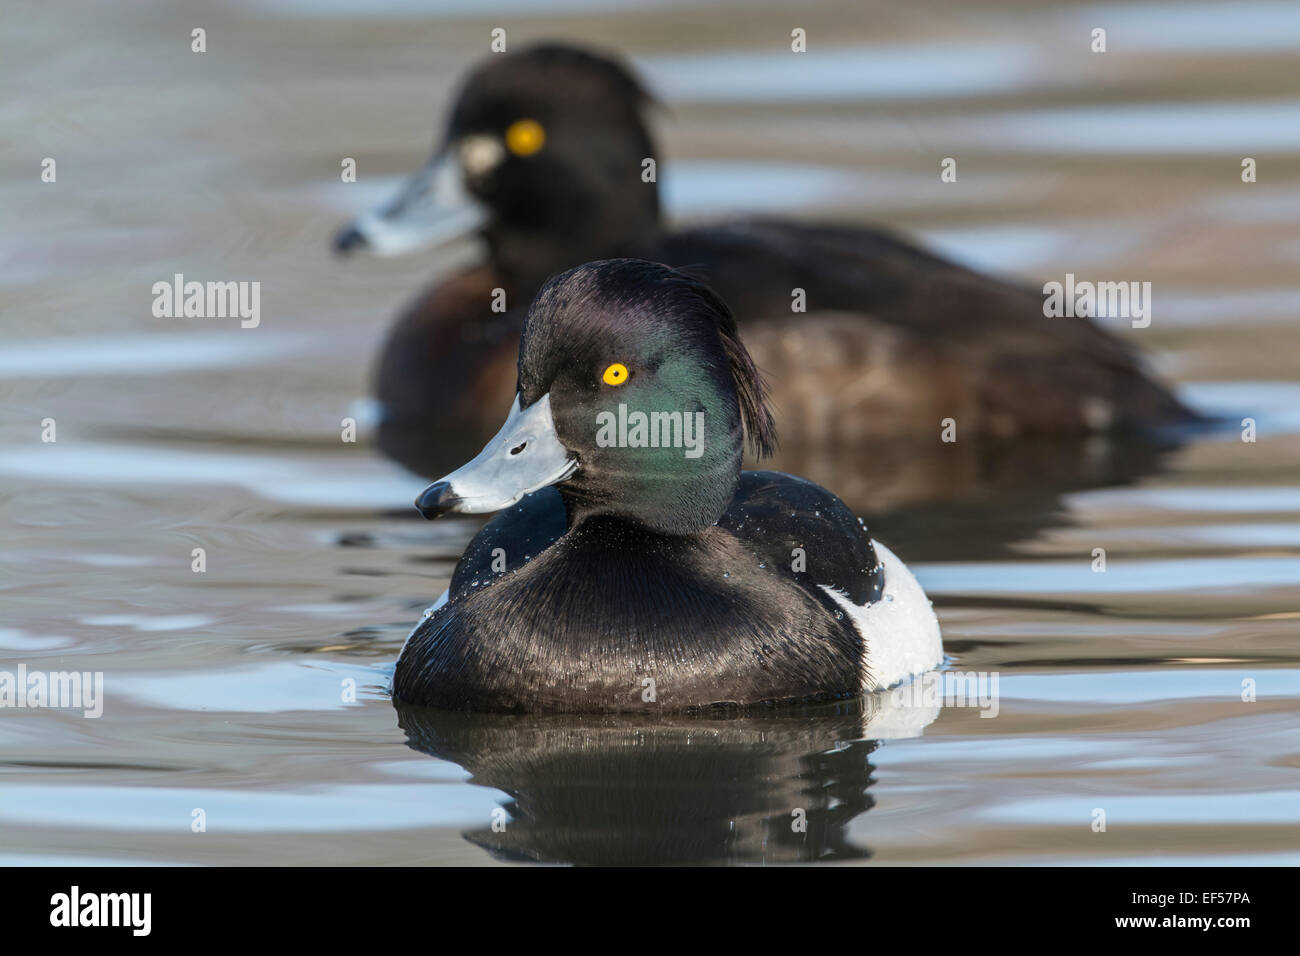 Tufted duck (Aythya fuligula). Adult male with female behind. Stock Photo